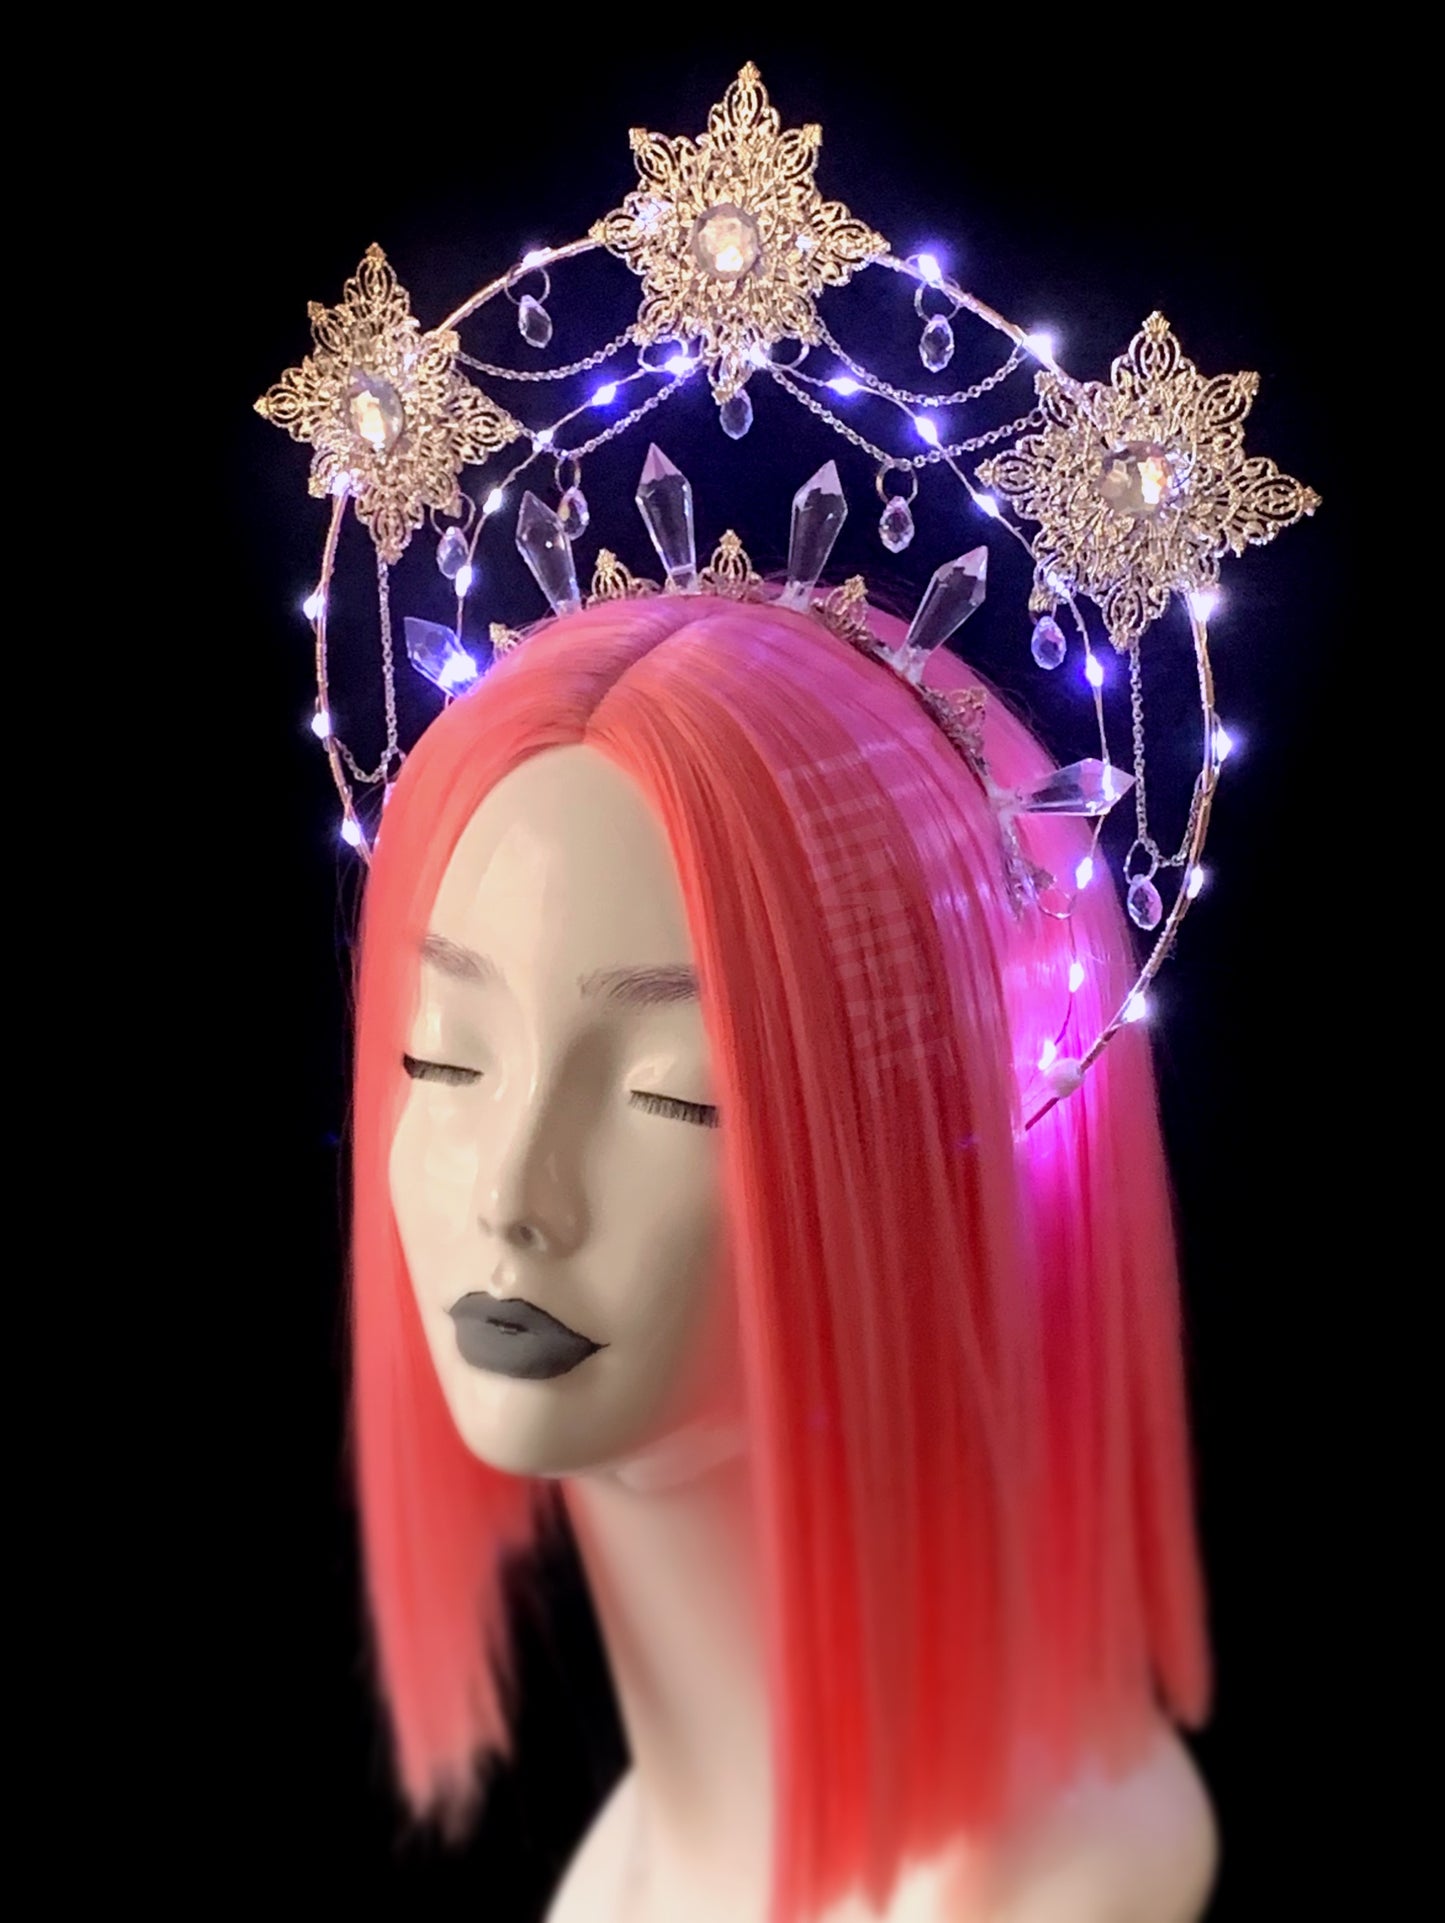 Ethereal Star Goddess Winter Crystal Fairy Queen Crown Snowflake Halo Tiara, One-of-A-Kind